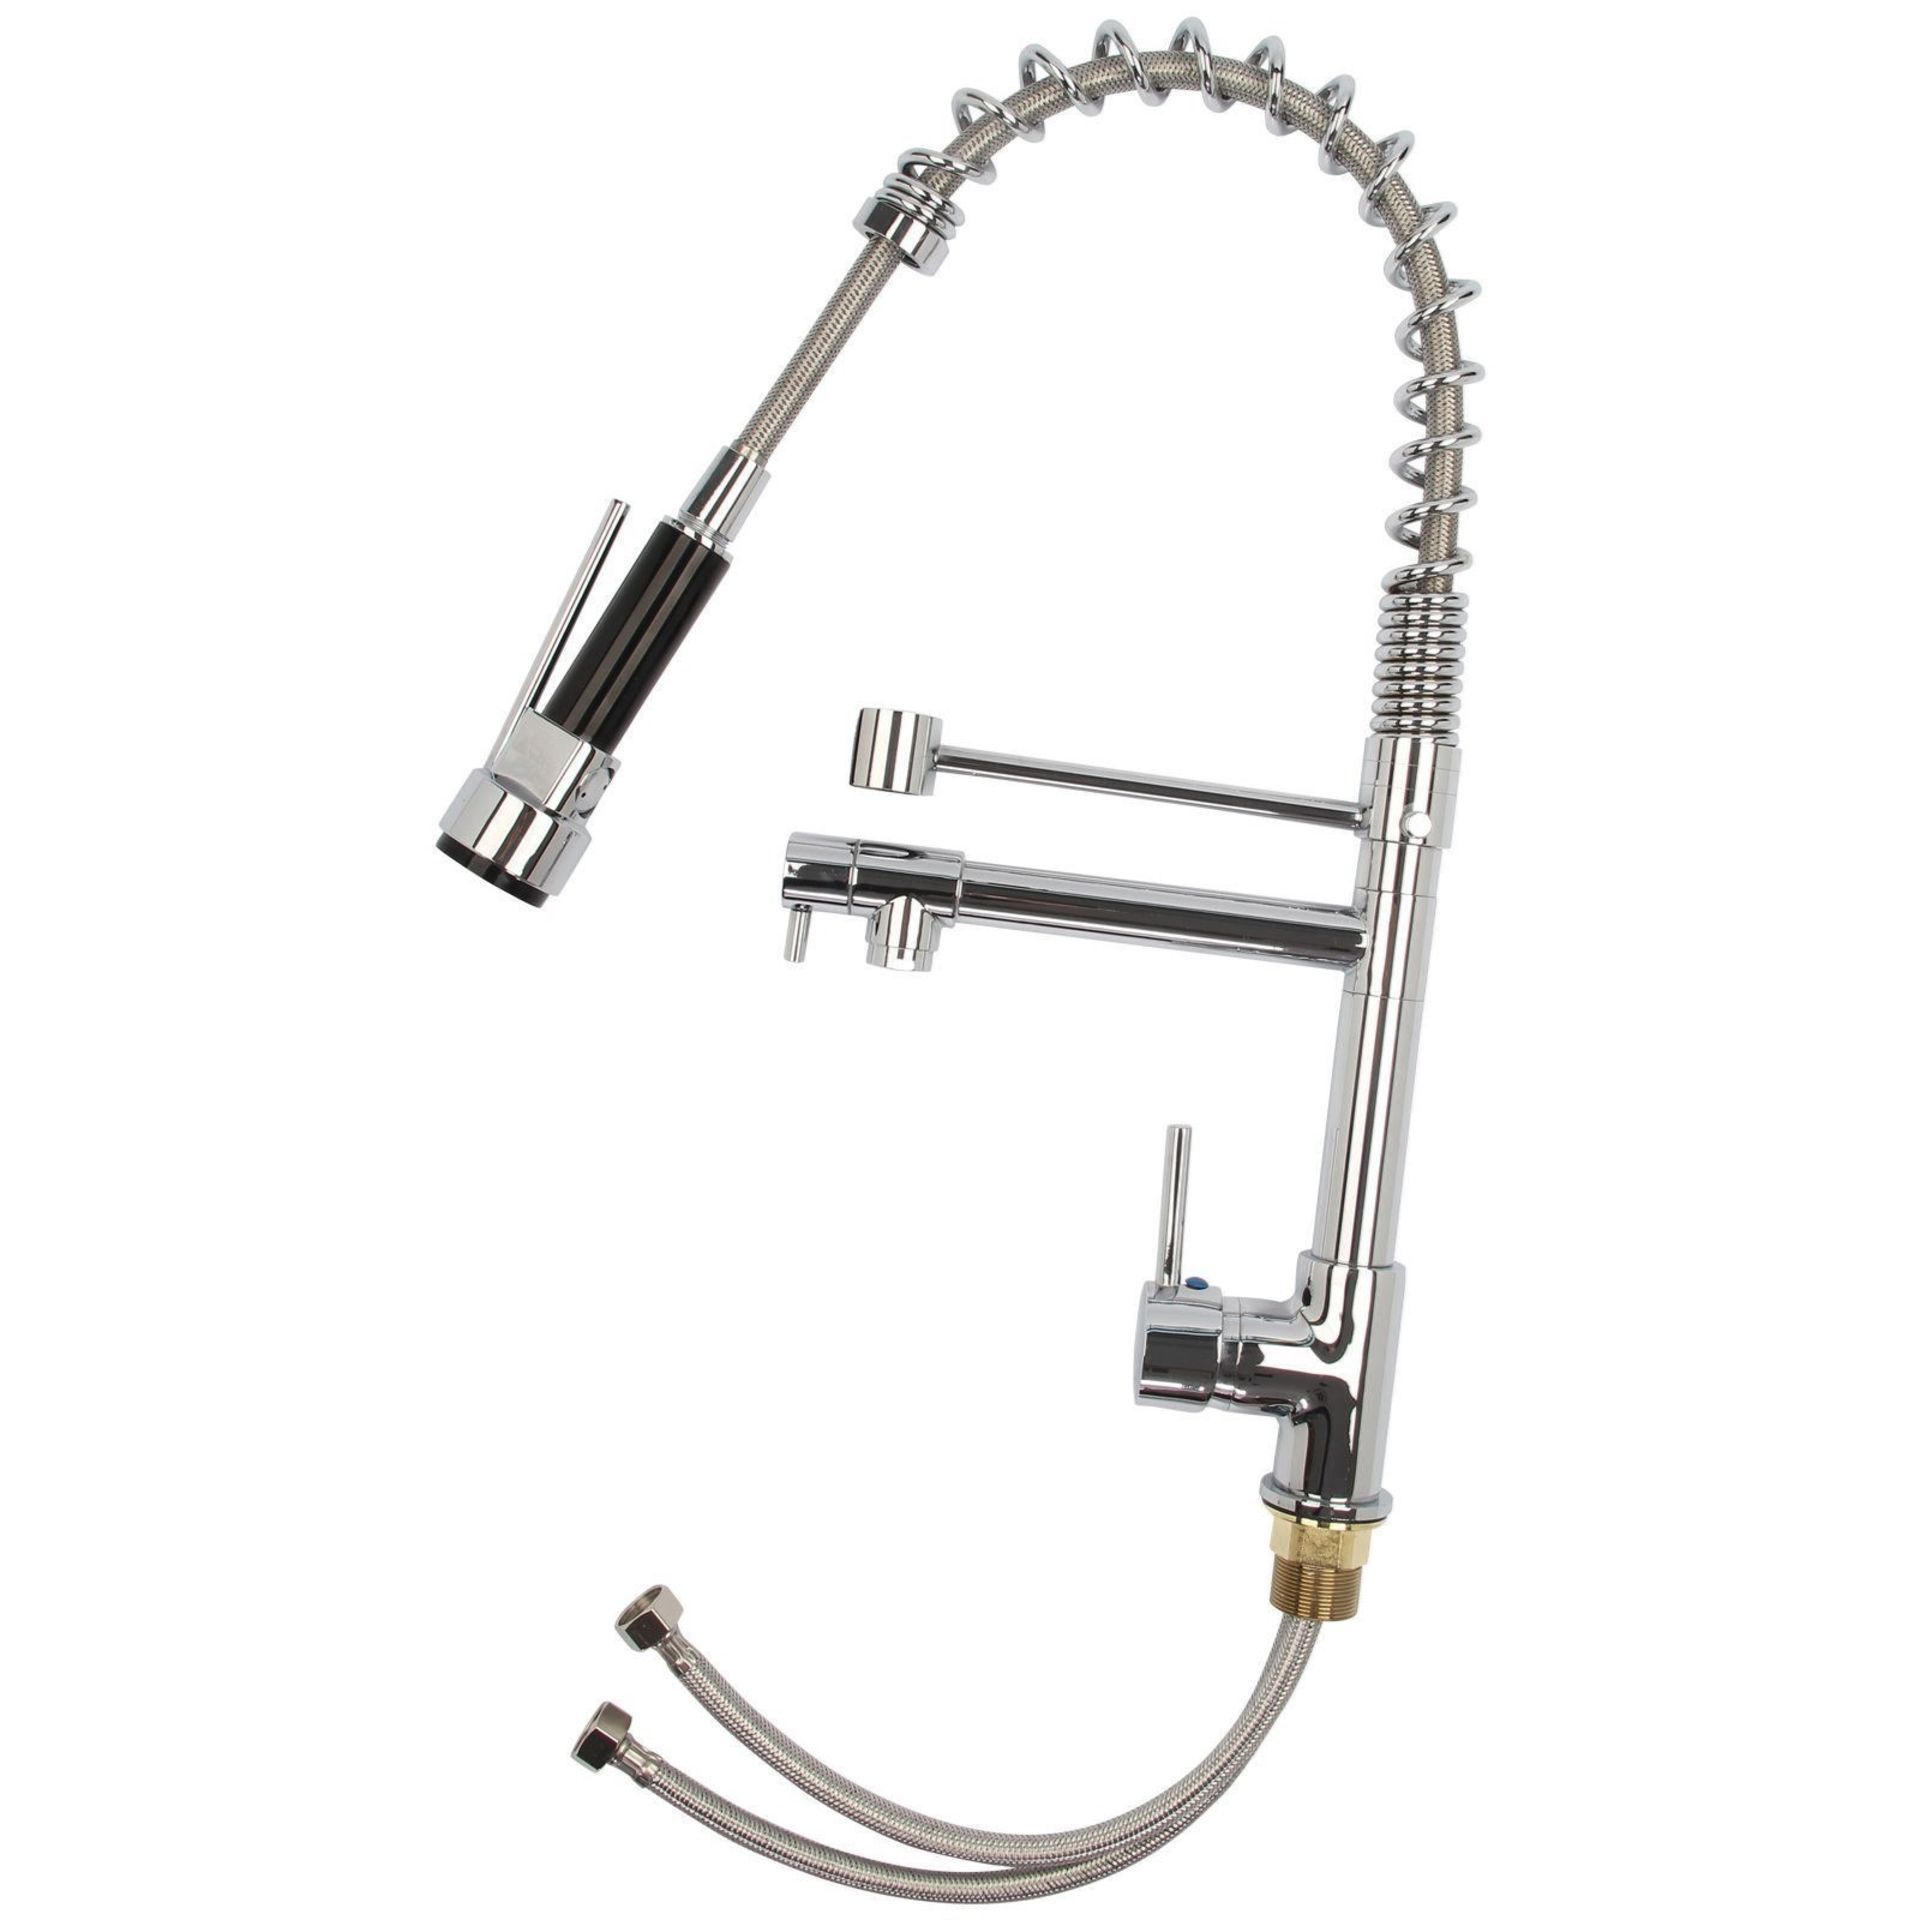 New & Boxed Bentley Modern Monobloc Chrome Brass Pull Out Spray Mixer Tap. RRP £349.99.This Ta... - Image 2 of 2